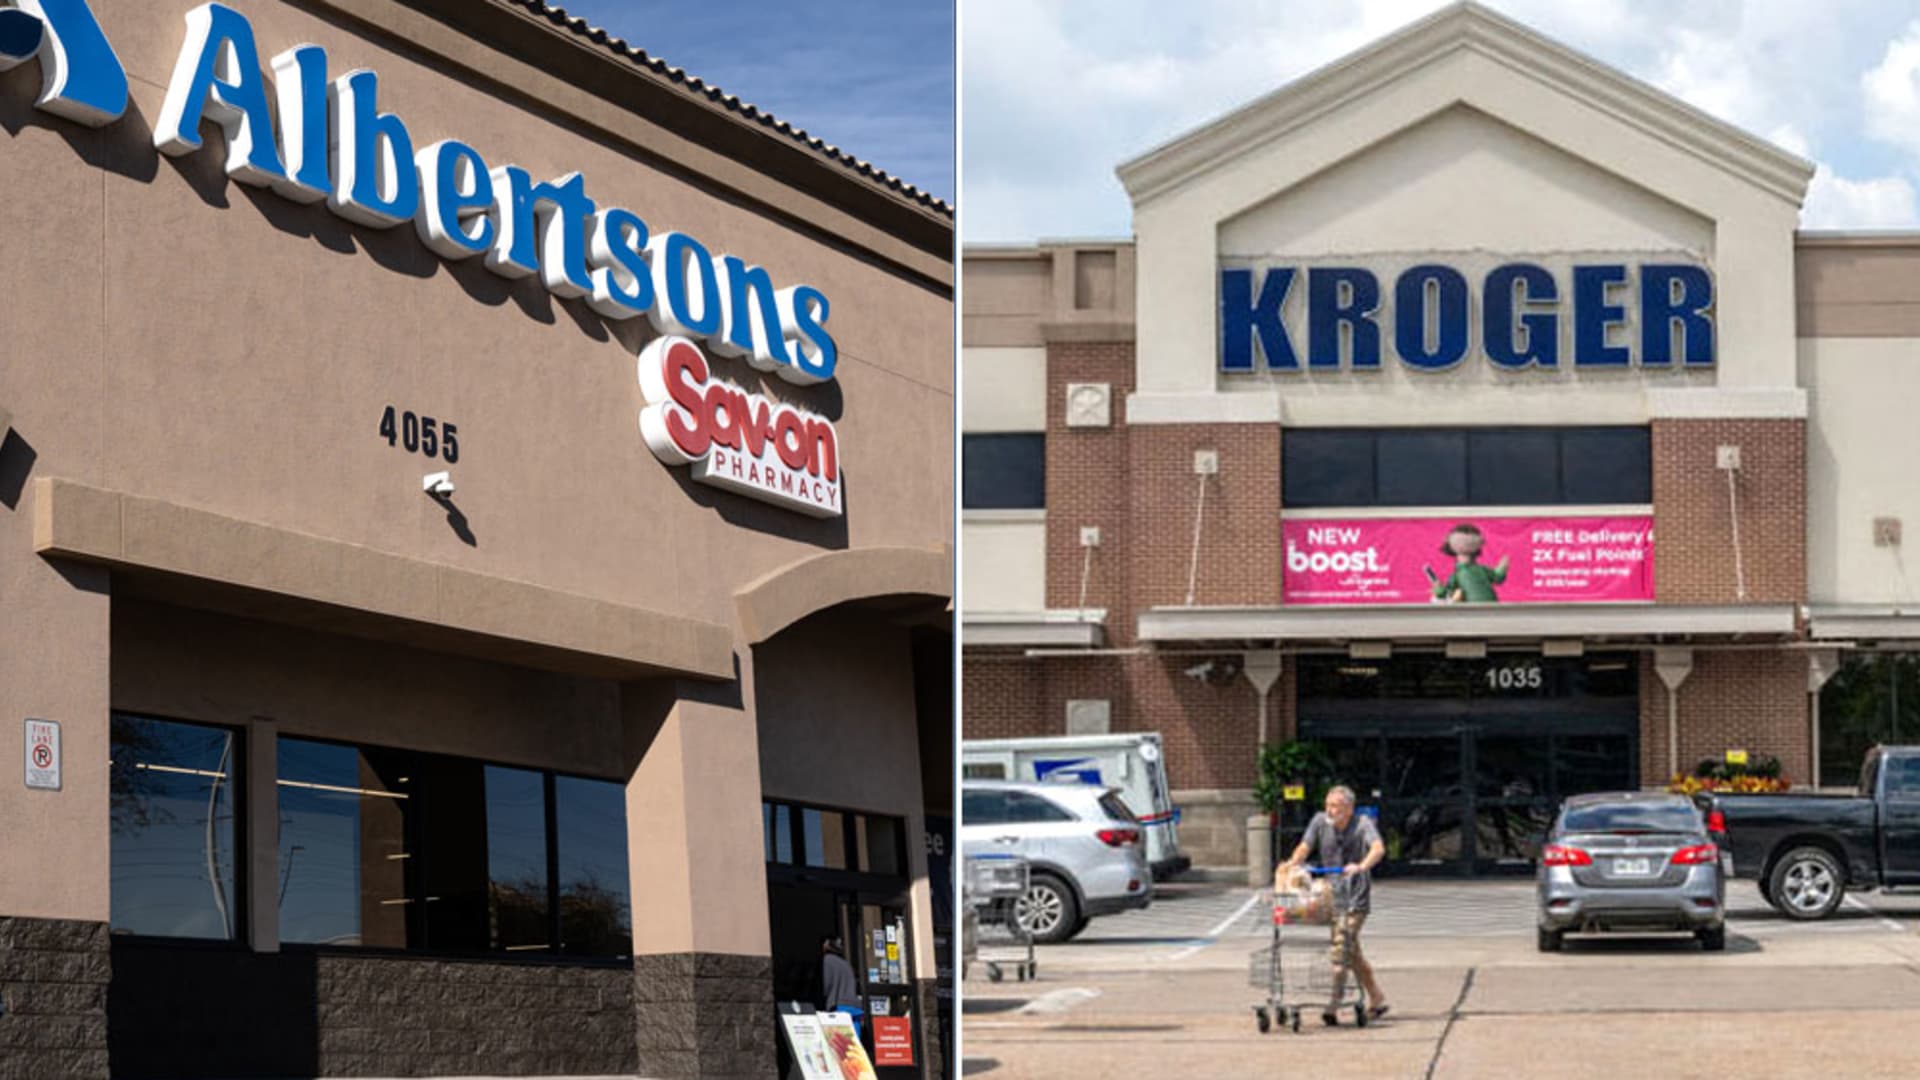 Kroger agrees to buy rival grocery company Albertsons for $24.6 billion